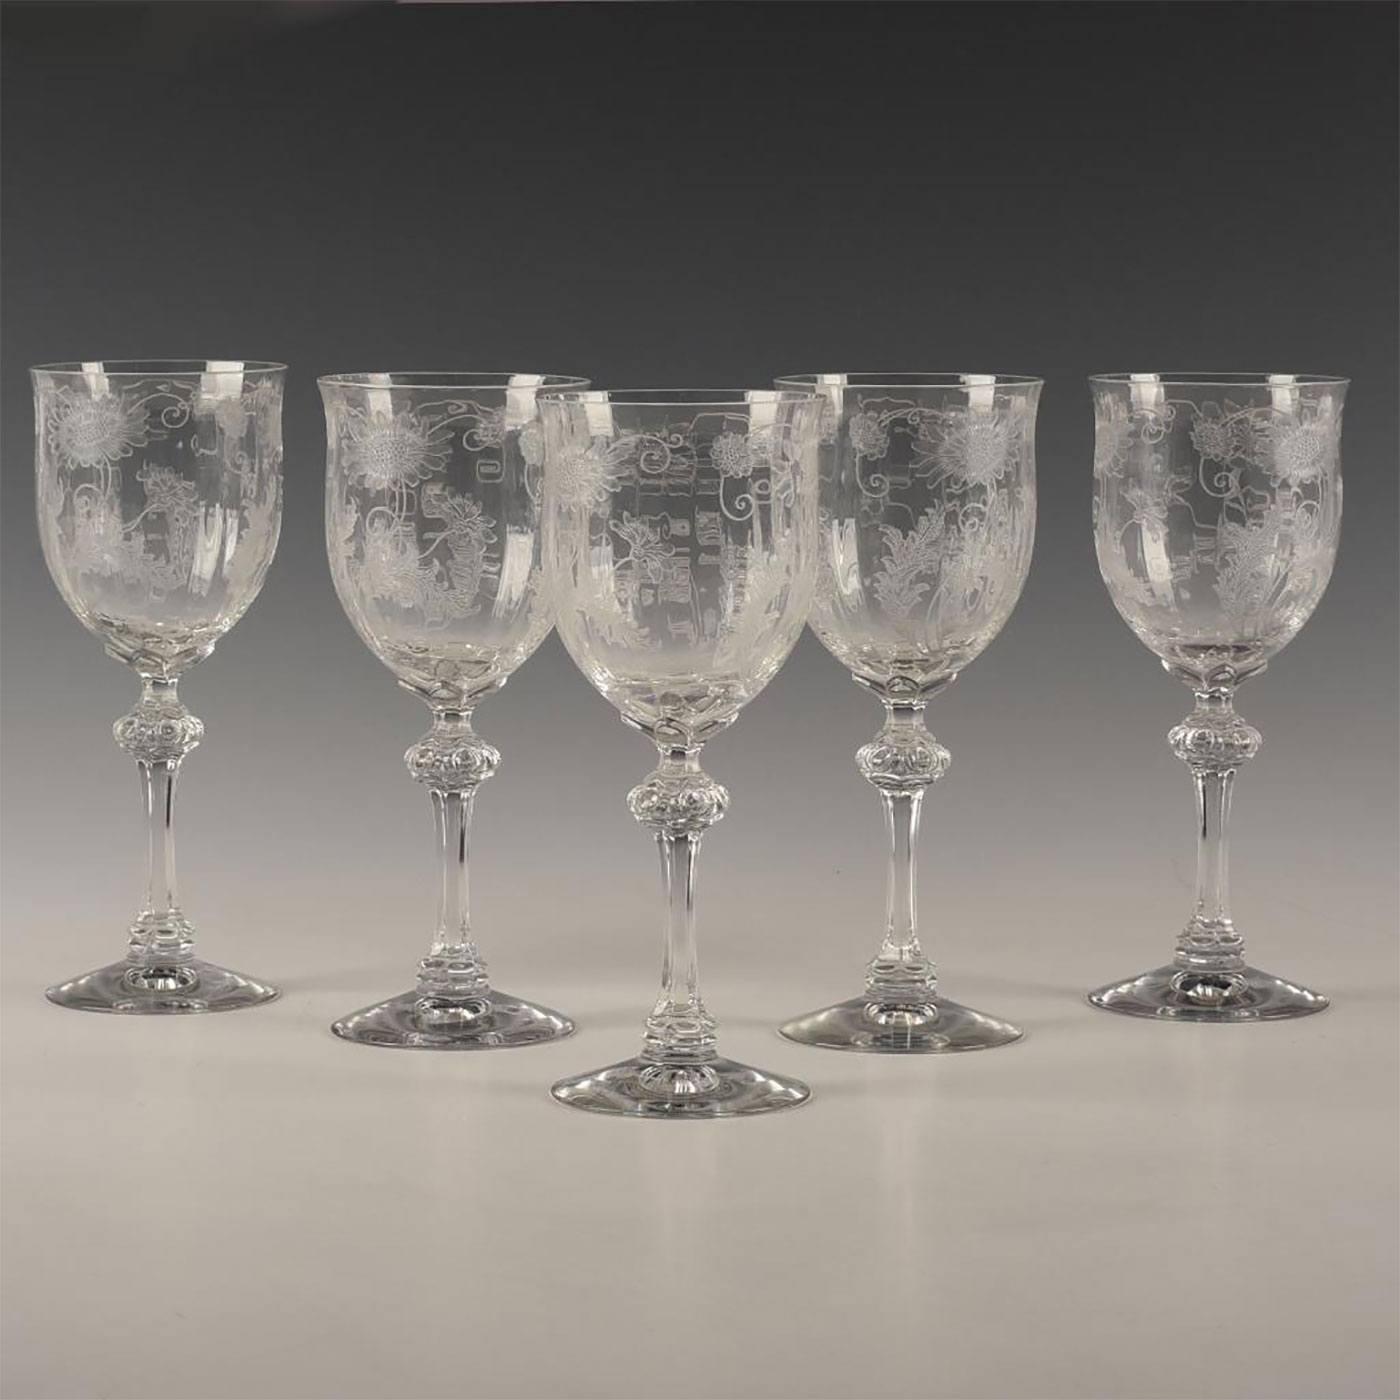 SET OF 5 WINE GLASSES, 4 GOBLETS, AND DUCK AERATOR - Image 8 of 9